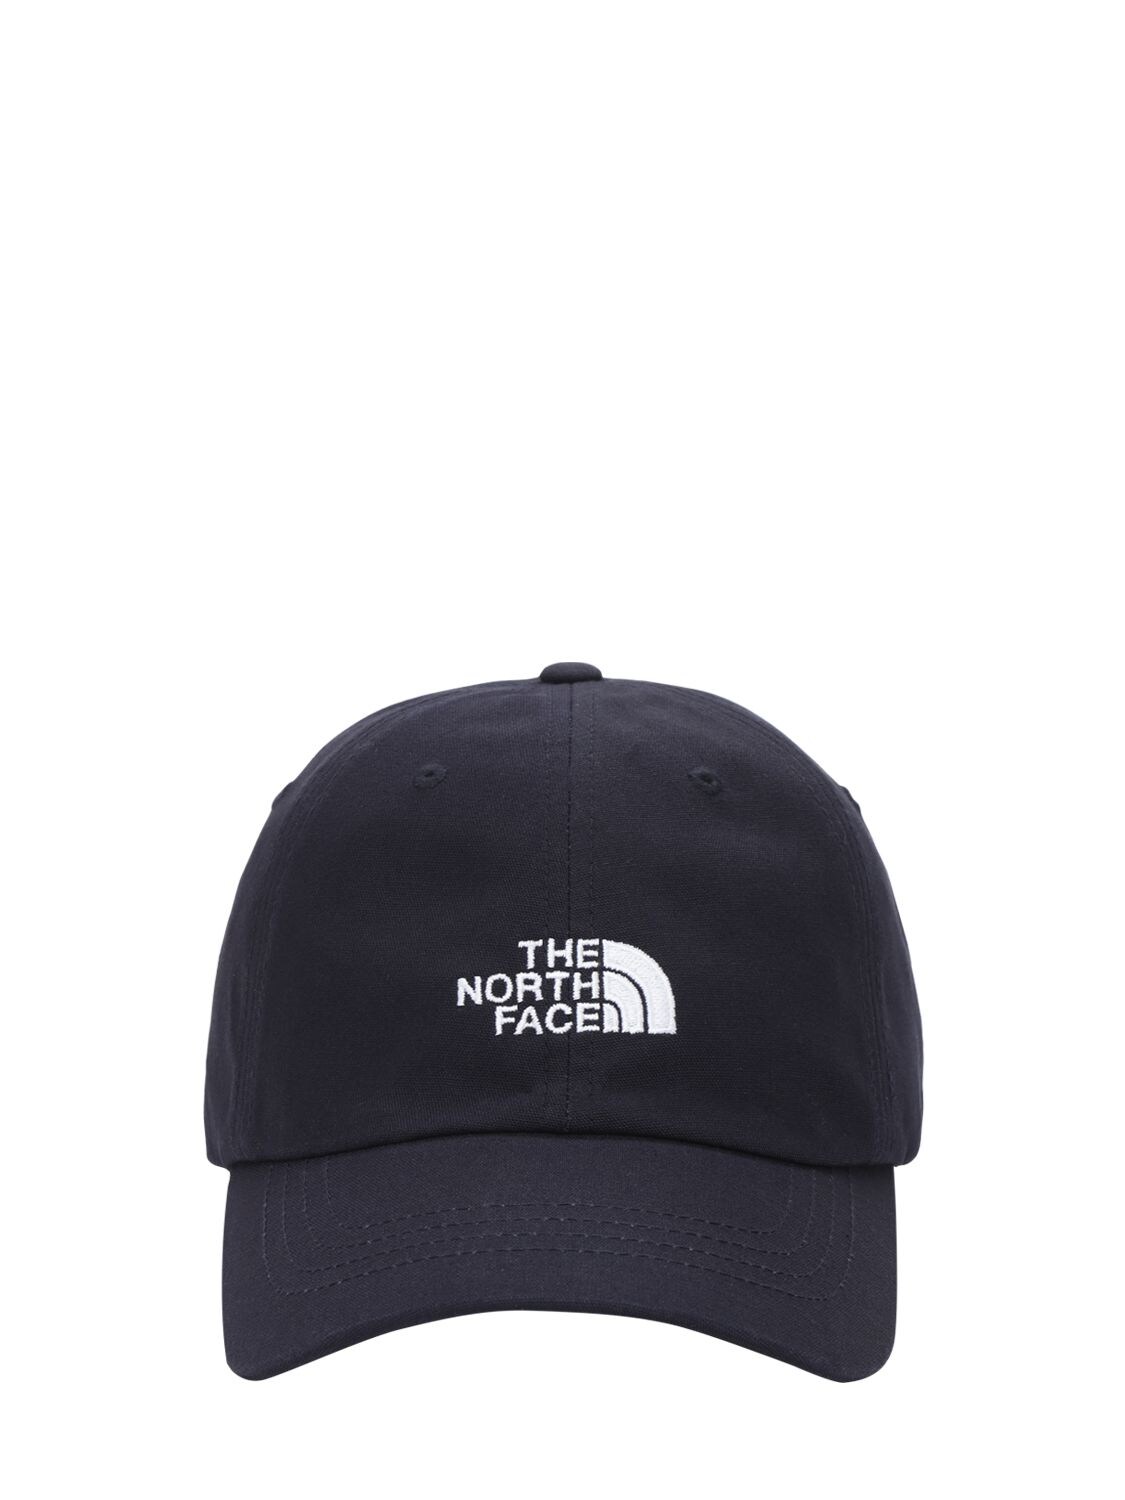 The North Face Cotton Canvas Baseball Hat In Navy